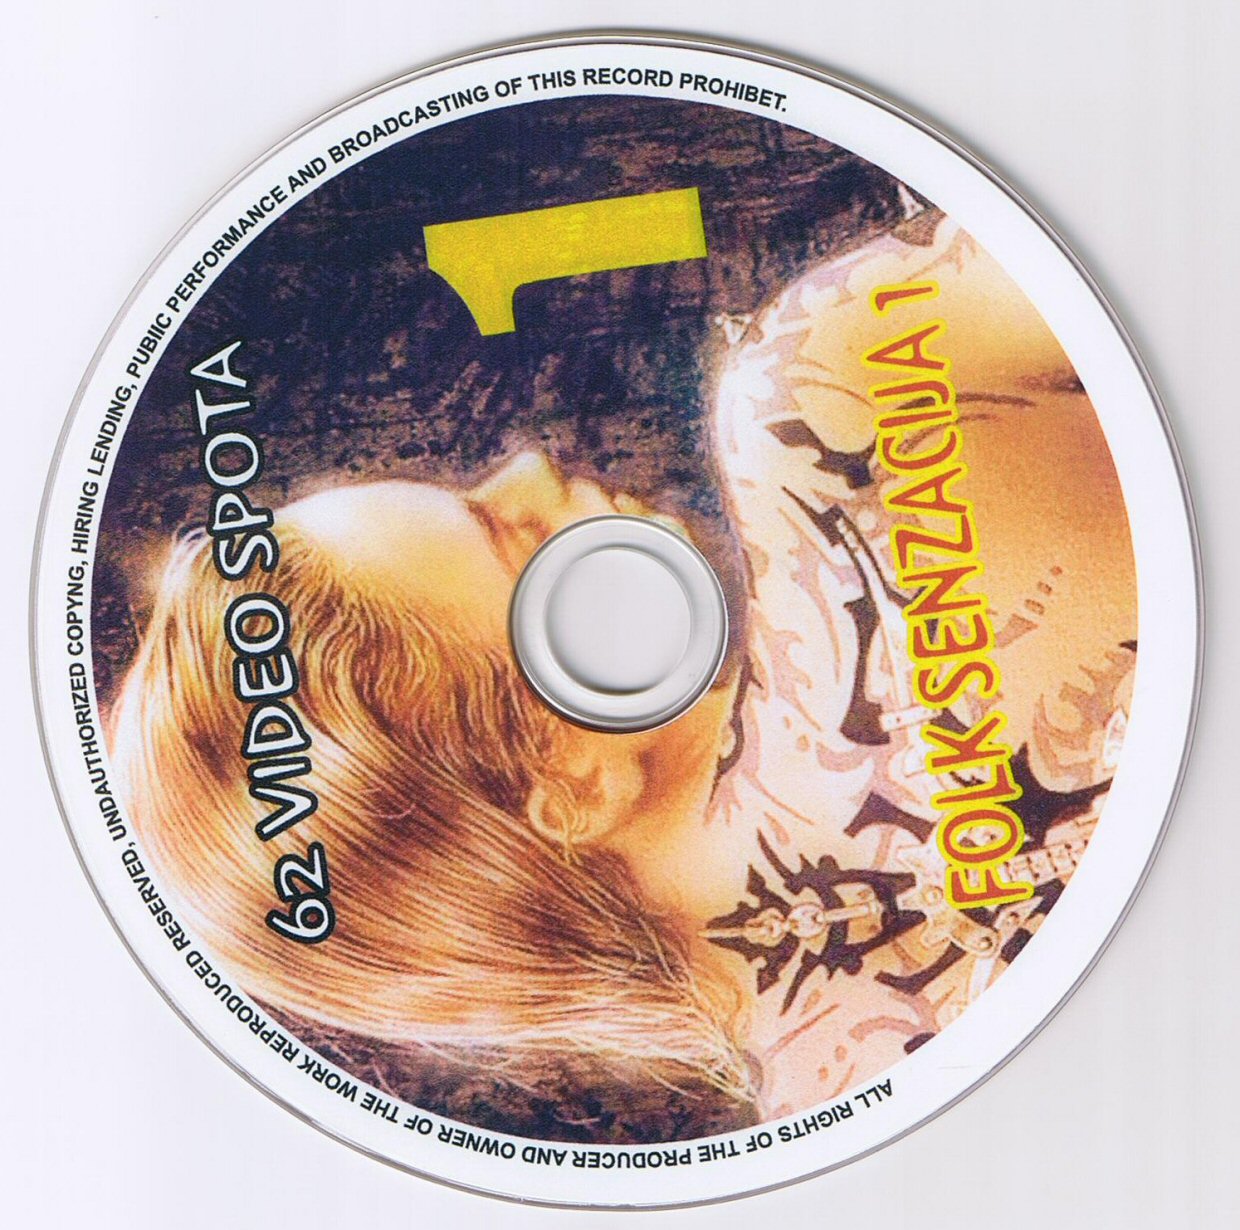 Click to view full size image -  DVD Cover - F - DVD - FOLK SENZACIJA 1 - CD - DVD - FOLK SENZACIJA 1 - CD.JPG